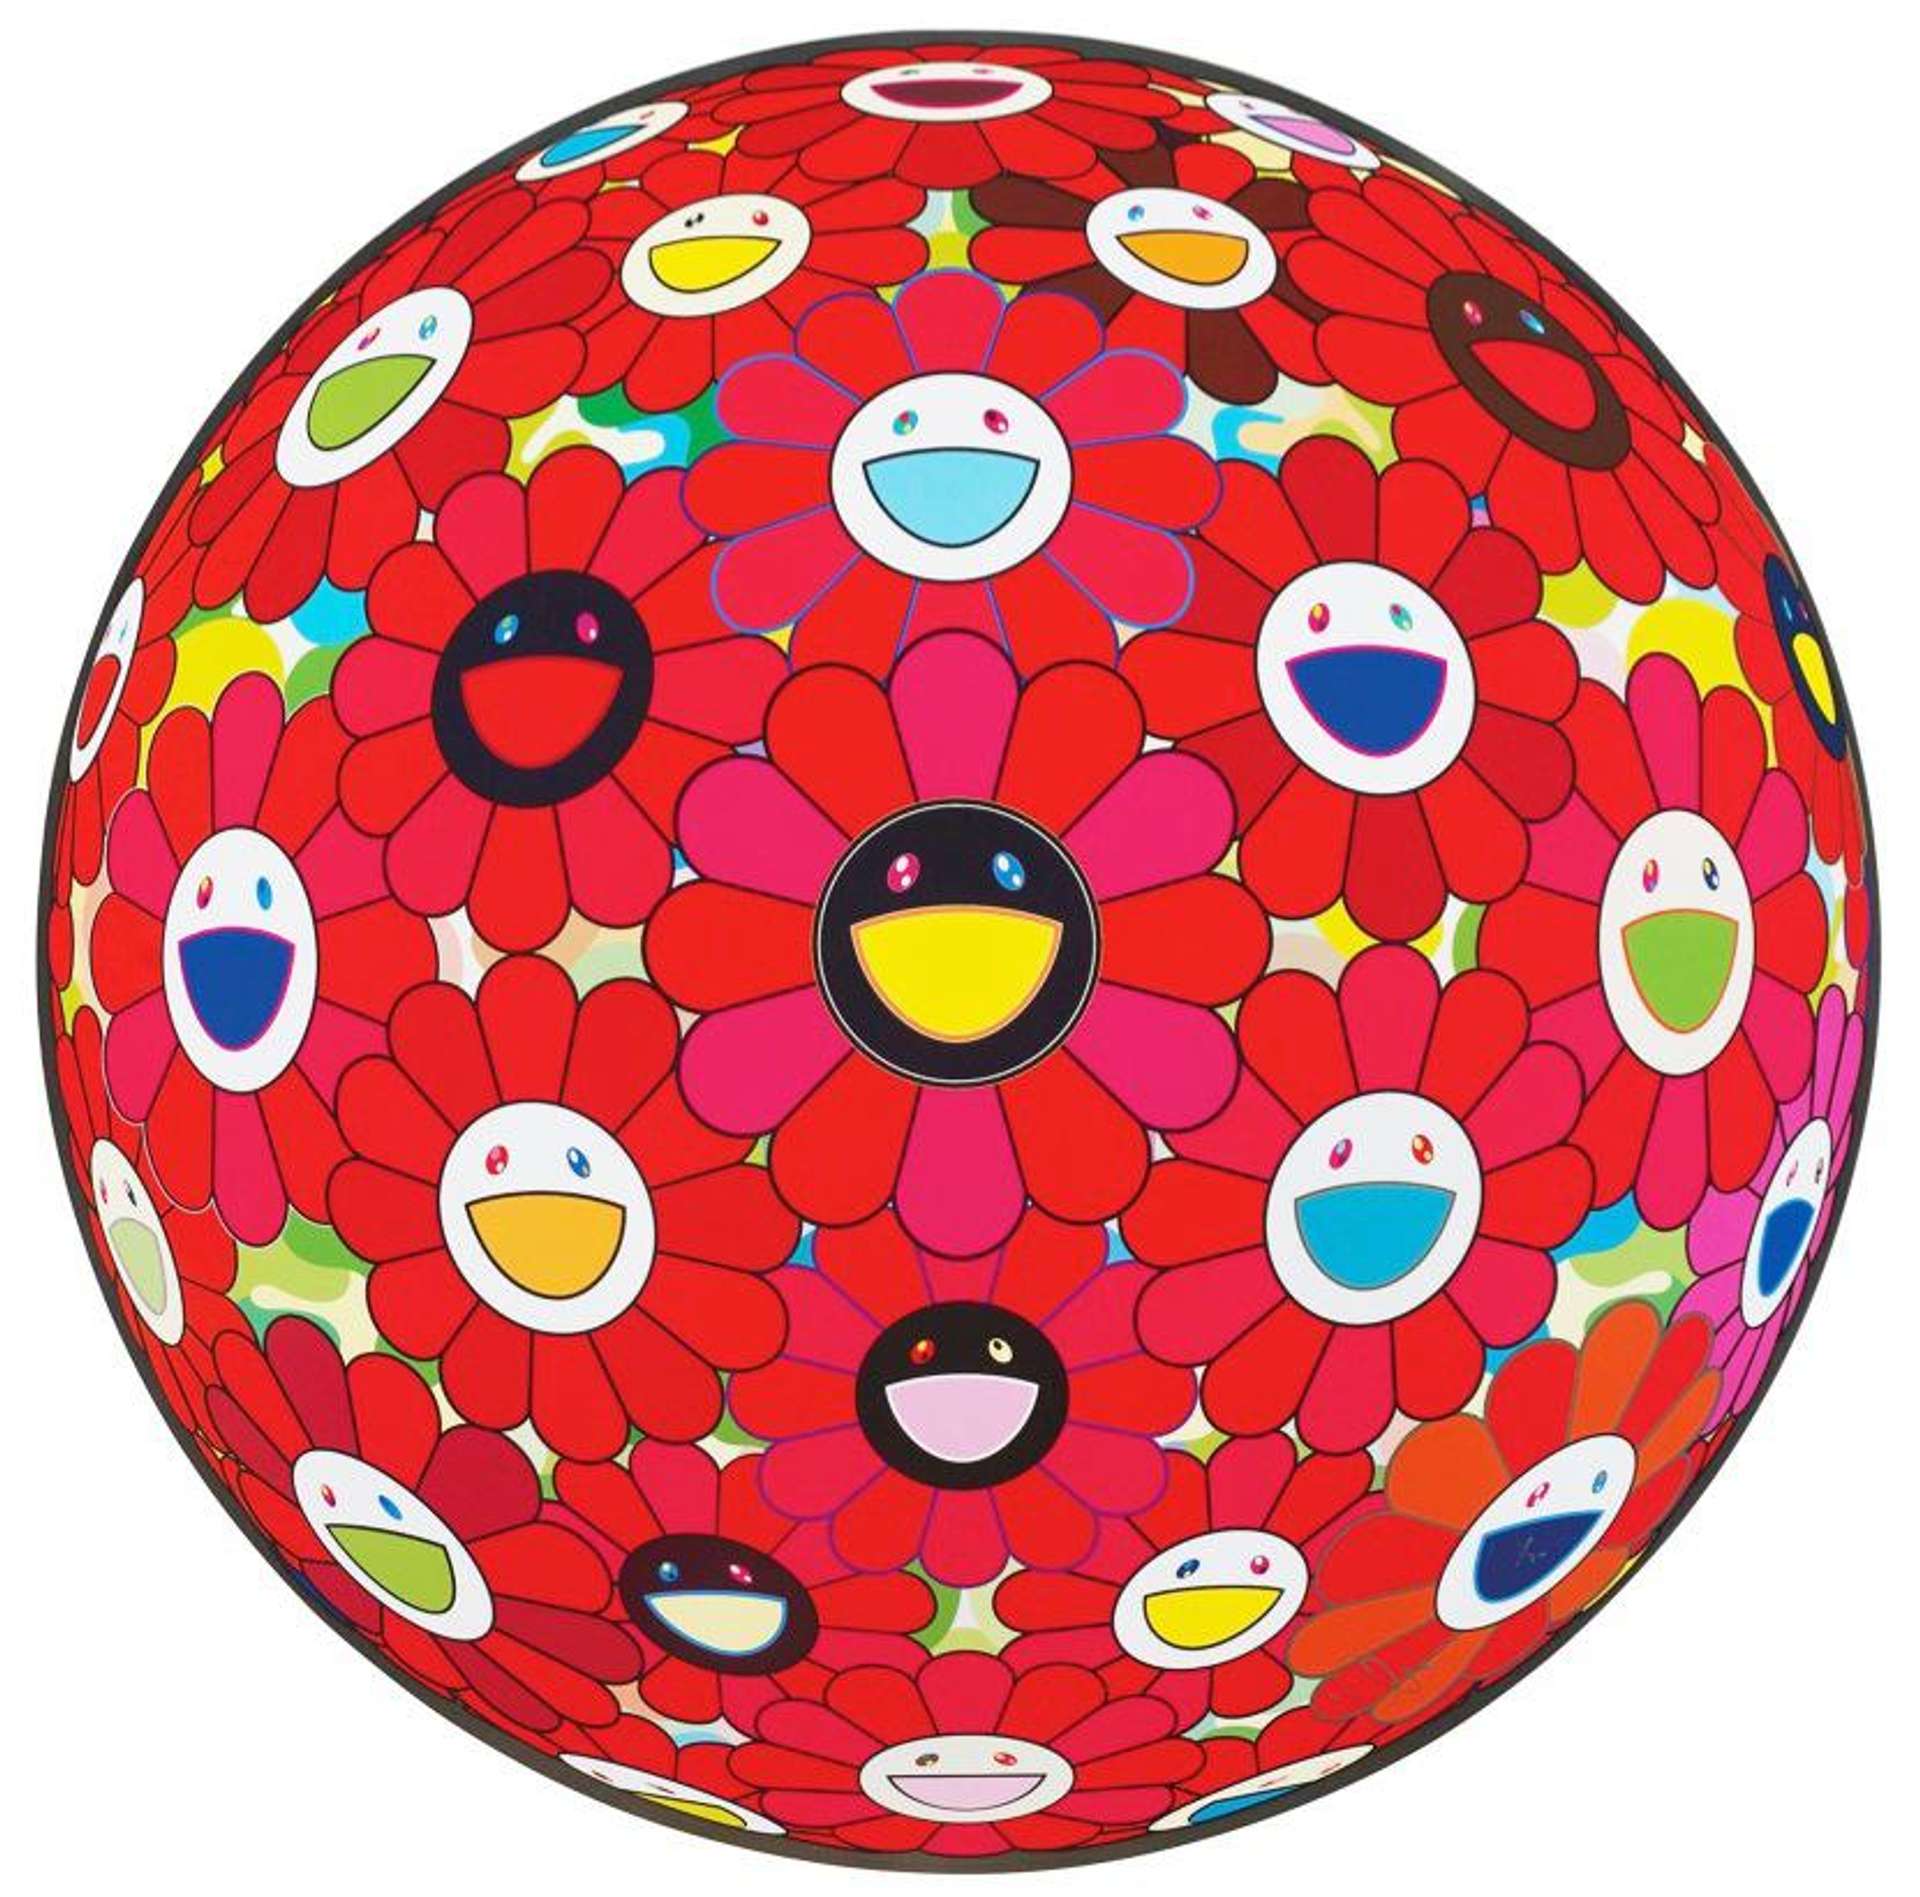 Takashi Murakami’s Flower Ball: Letter to Picasso. A screenprint of a circle filled with red daisy flowers with animated white and black faces.